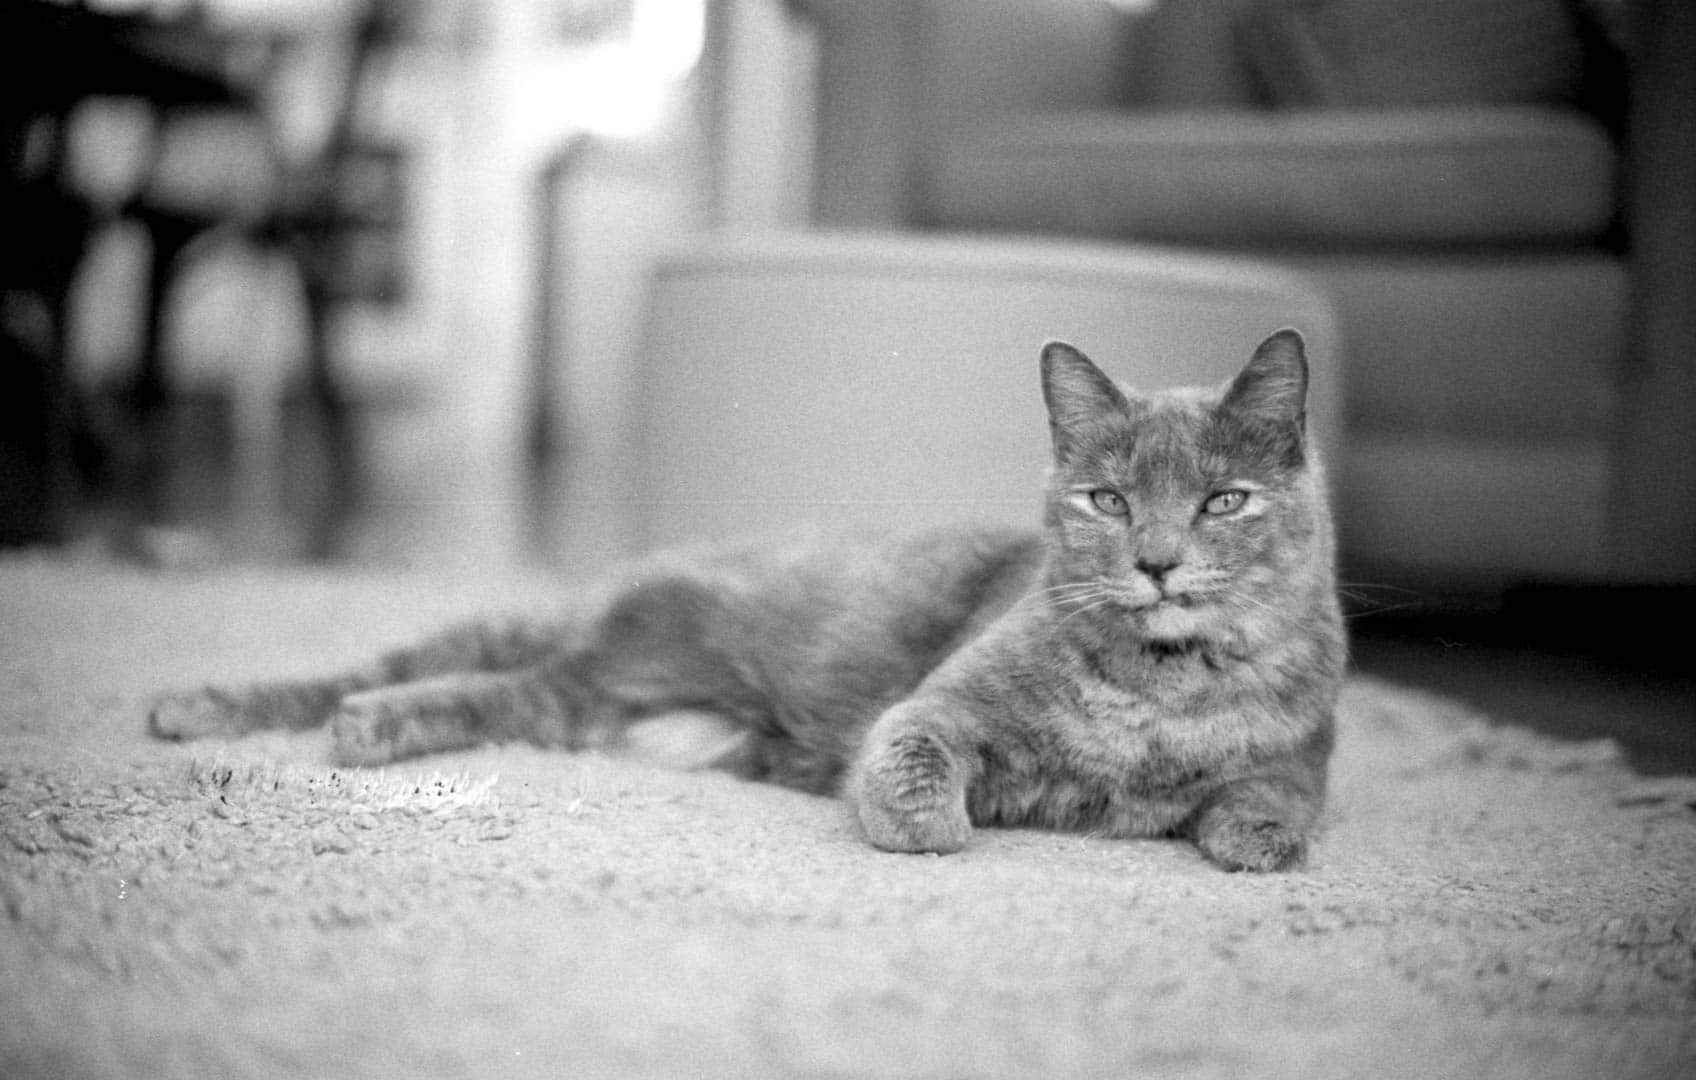 A cat relaxing on the carpet, looking at the camera